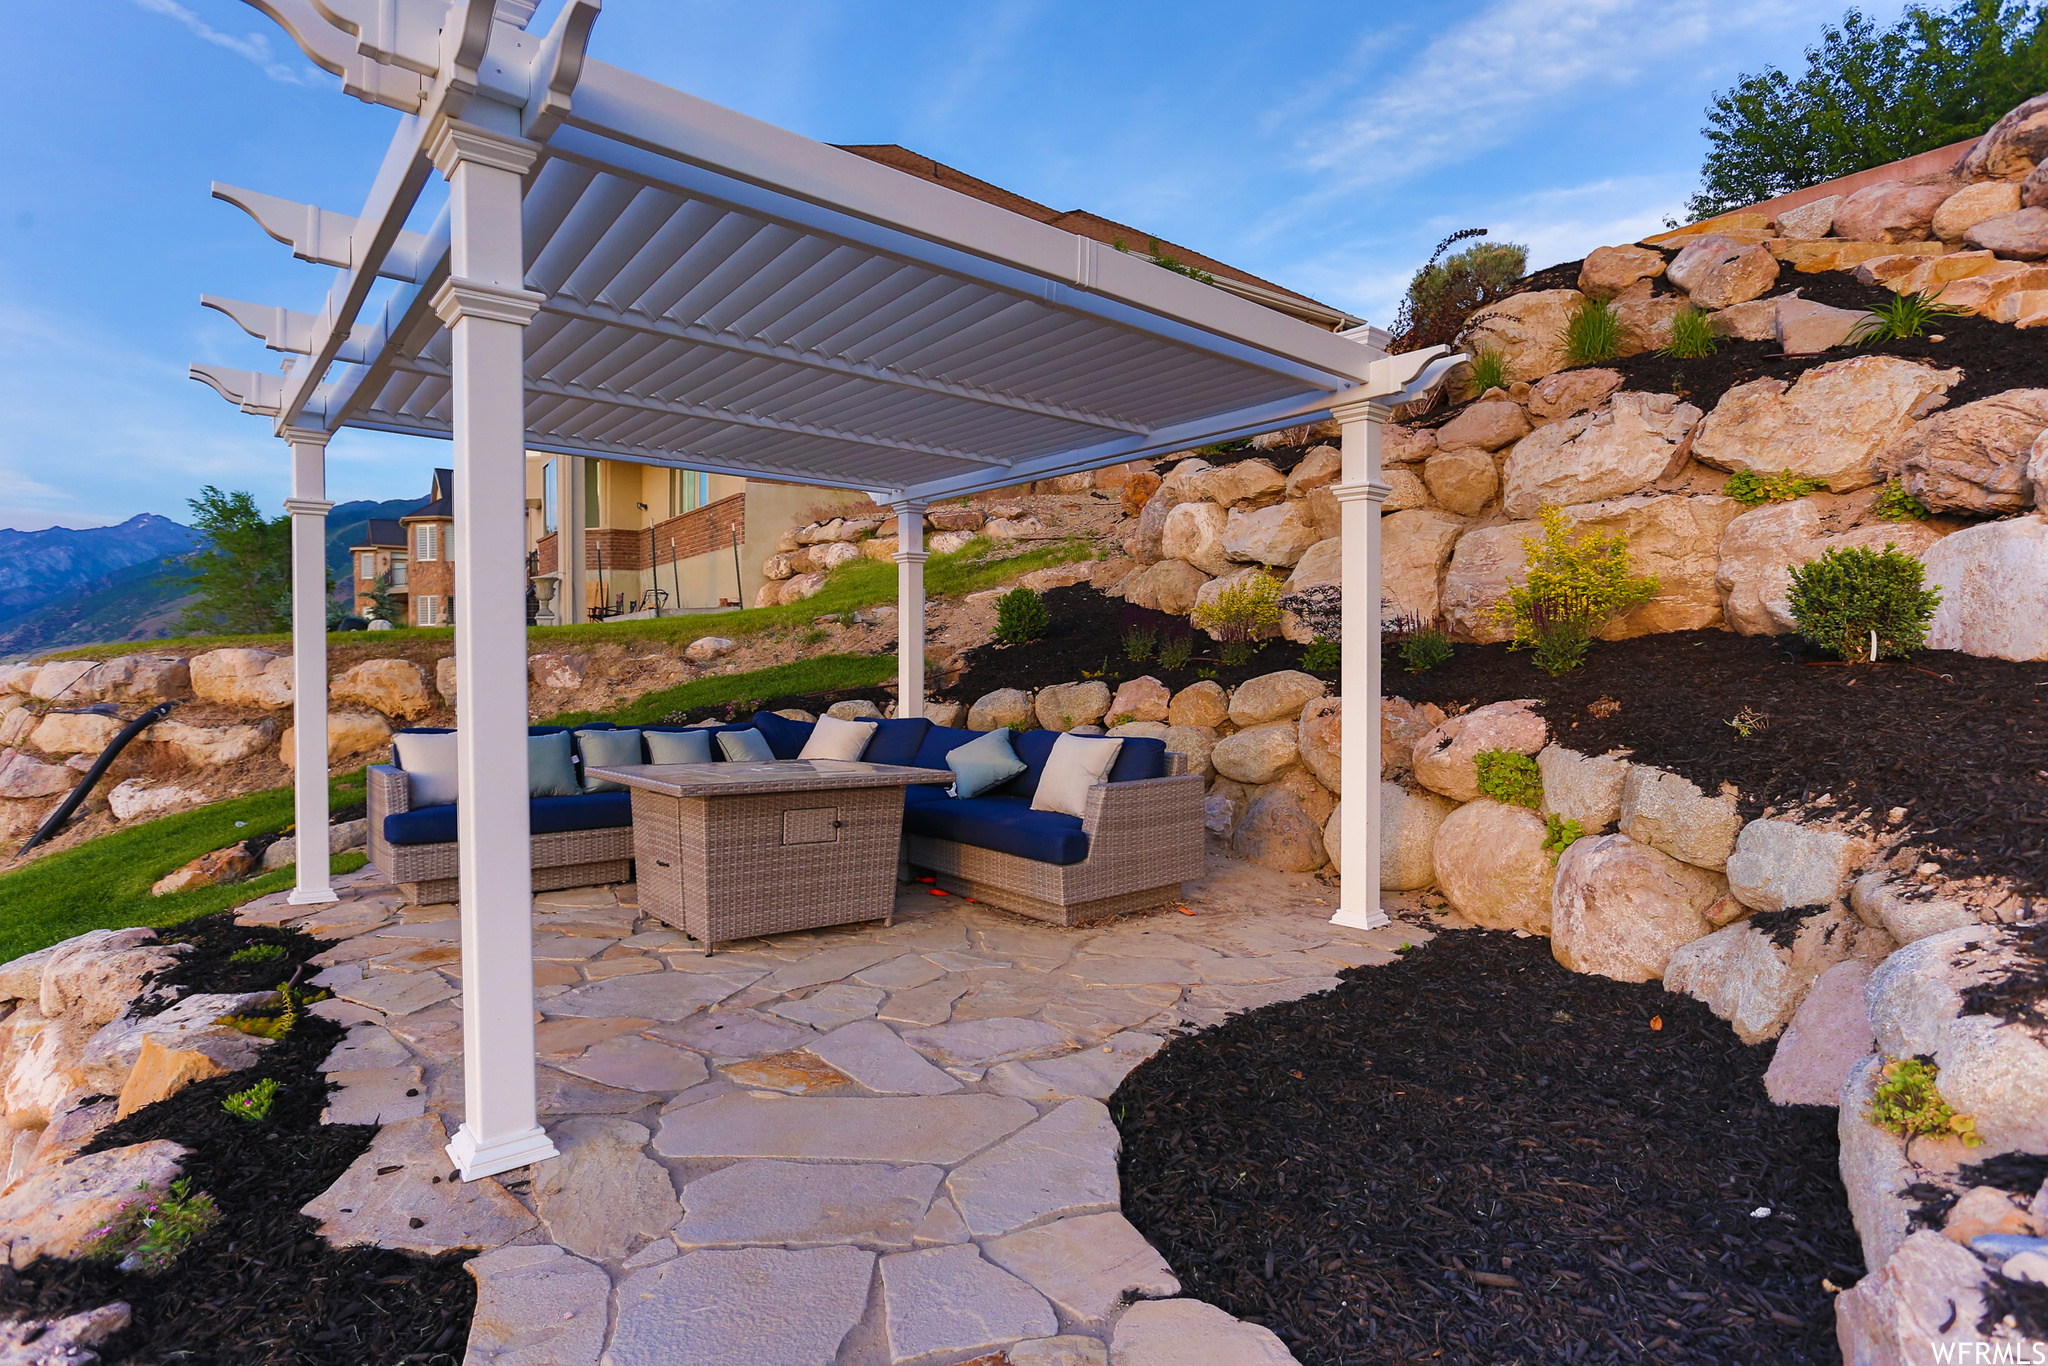 Private patio / terrace with an outdoor living space, a mountain view, and a pergola.